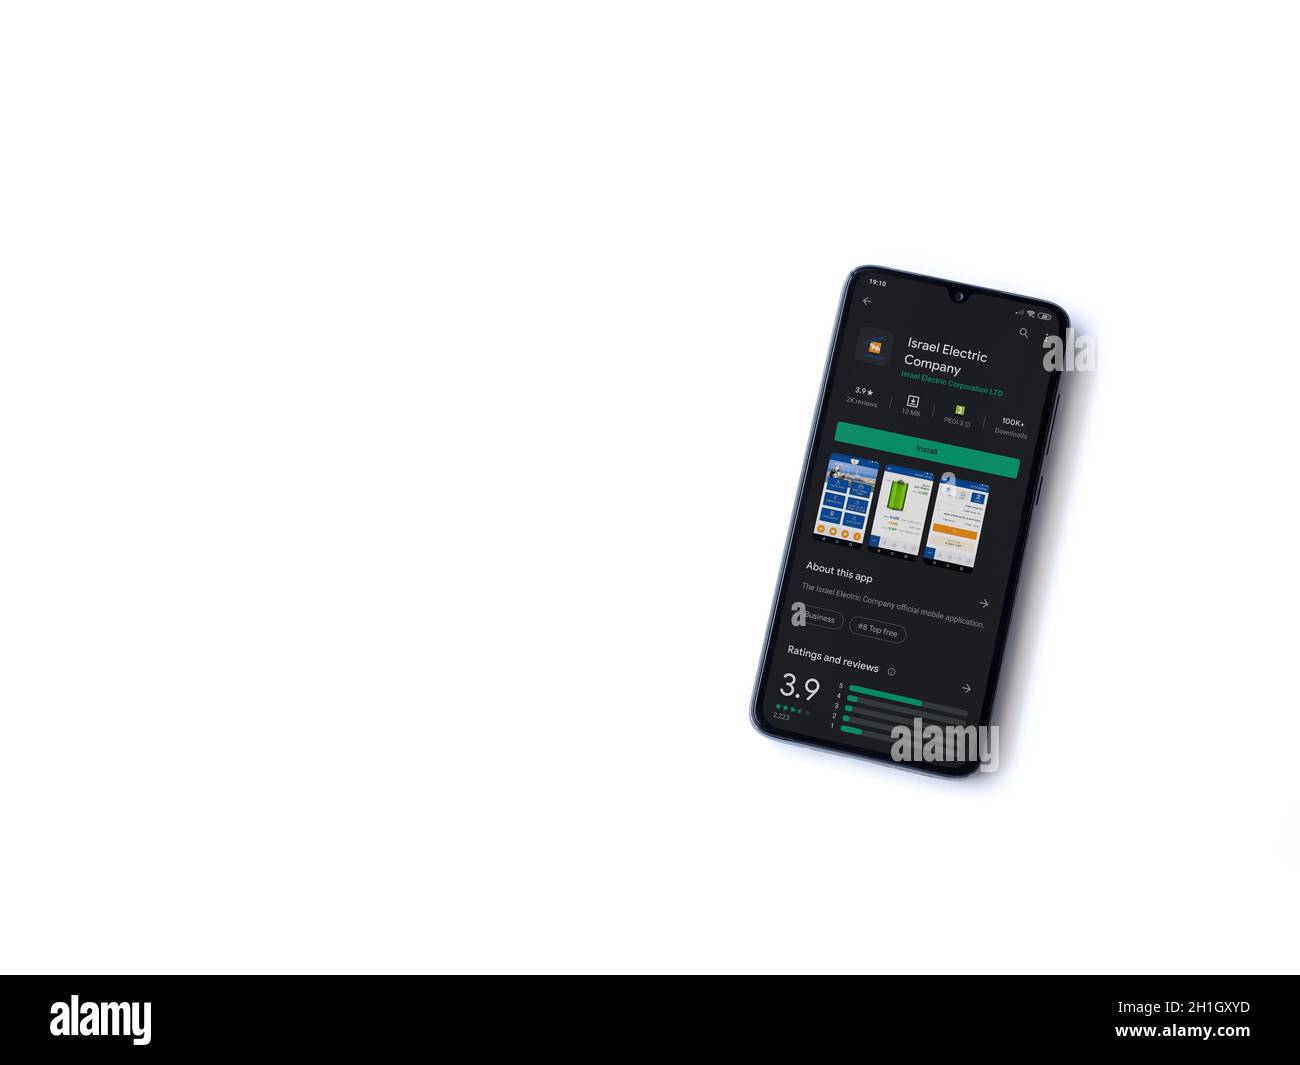 Lod, Israel - July 8, 2020: Israel Electric Corporation app play store page on the display of a black mobile smartphone isolated on white background. Stock Photo